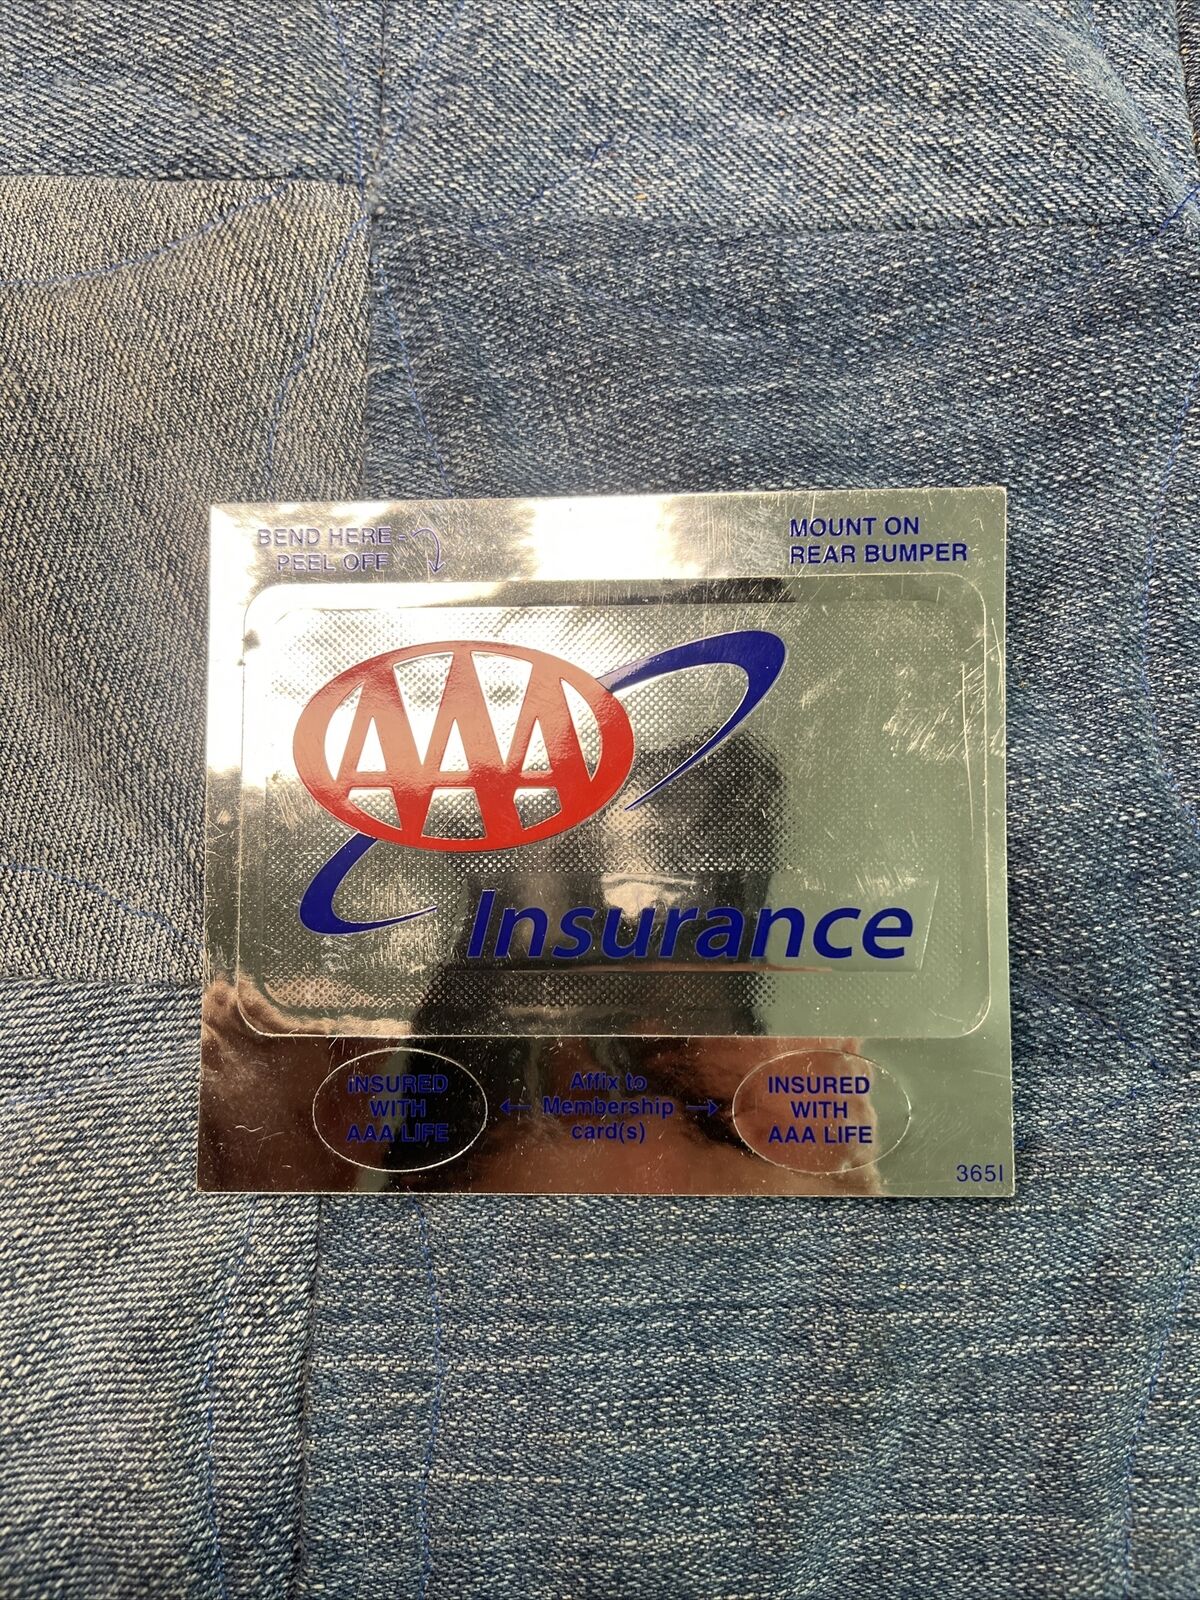 AAA Insurance Reflective Silver Foil Car Decal Adhesive Bumper Sticker 1970s